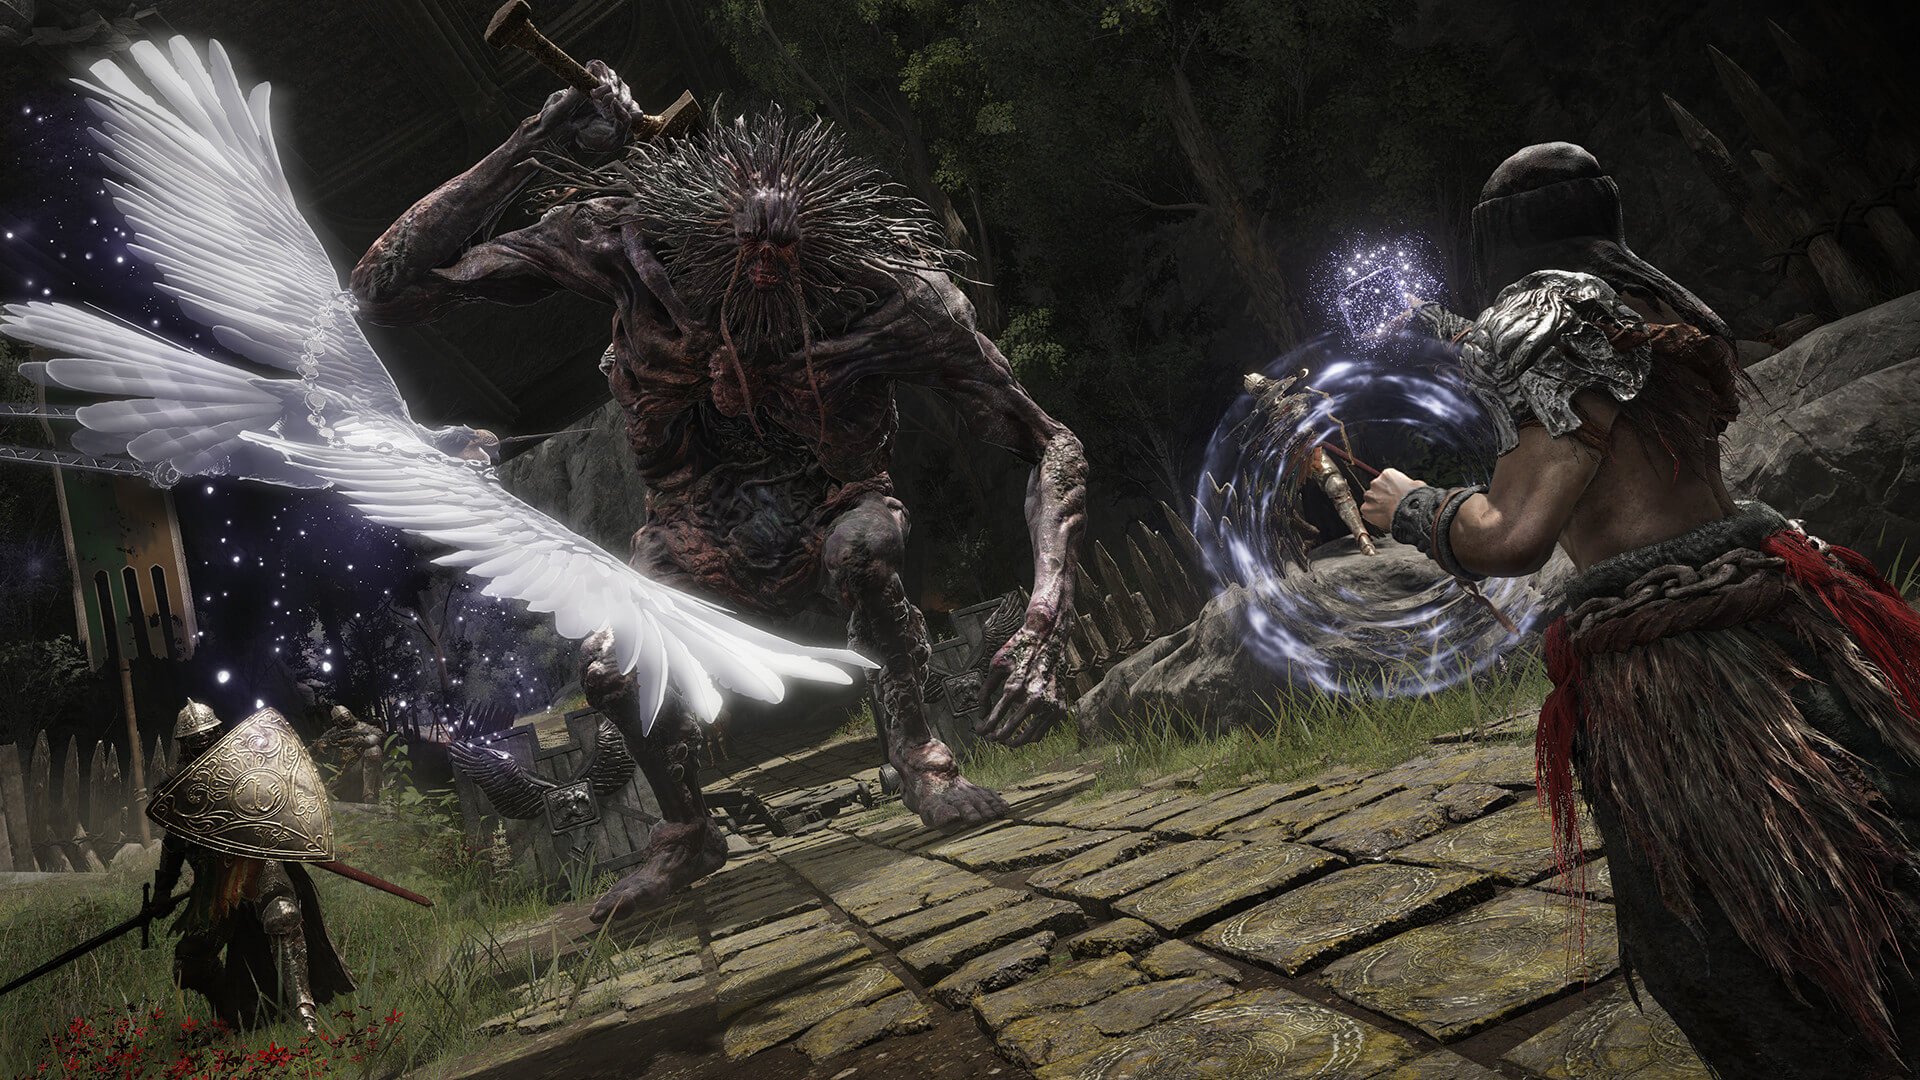 The player battling a giant enemy with spirit ashes in Elden Ring